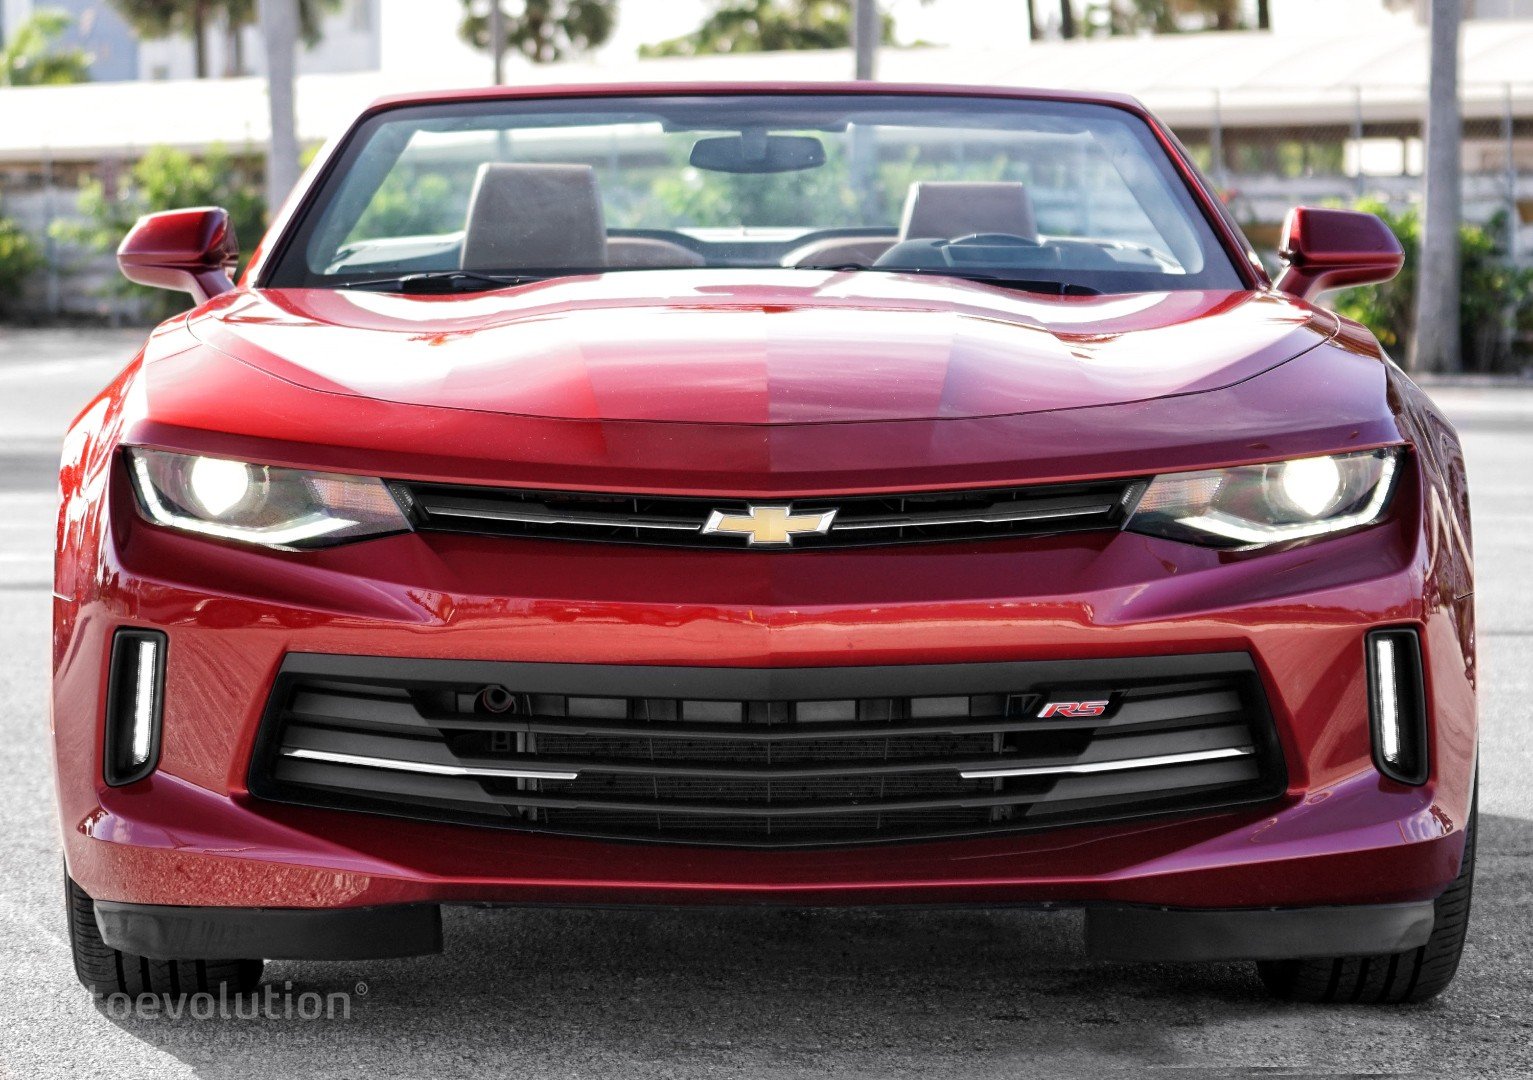 2016, Chevrolet, Camaro rs, Convertible, Cars, Red Wallpaper